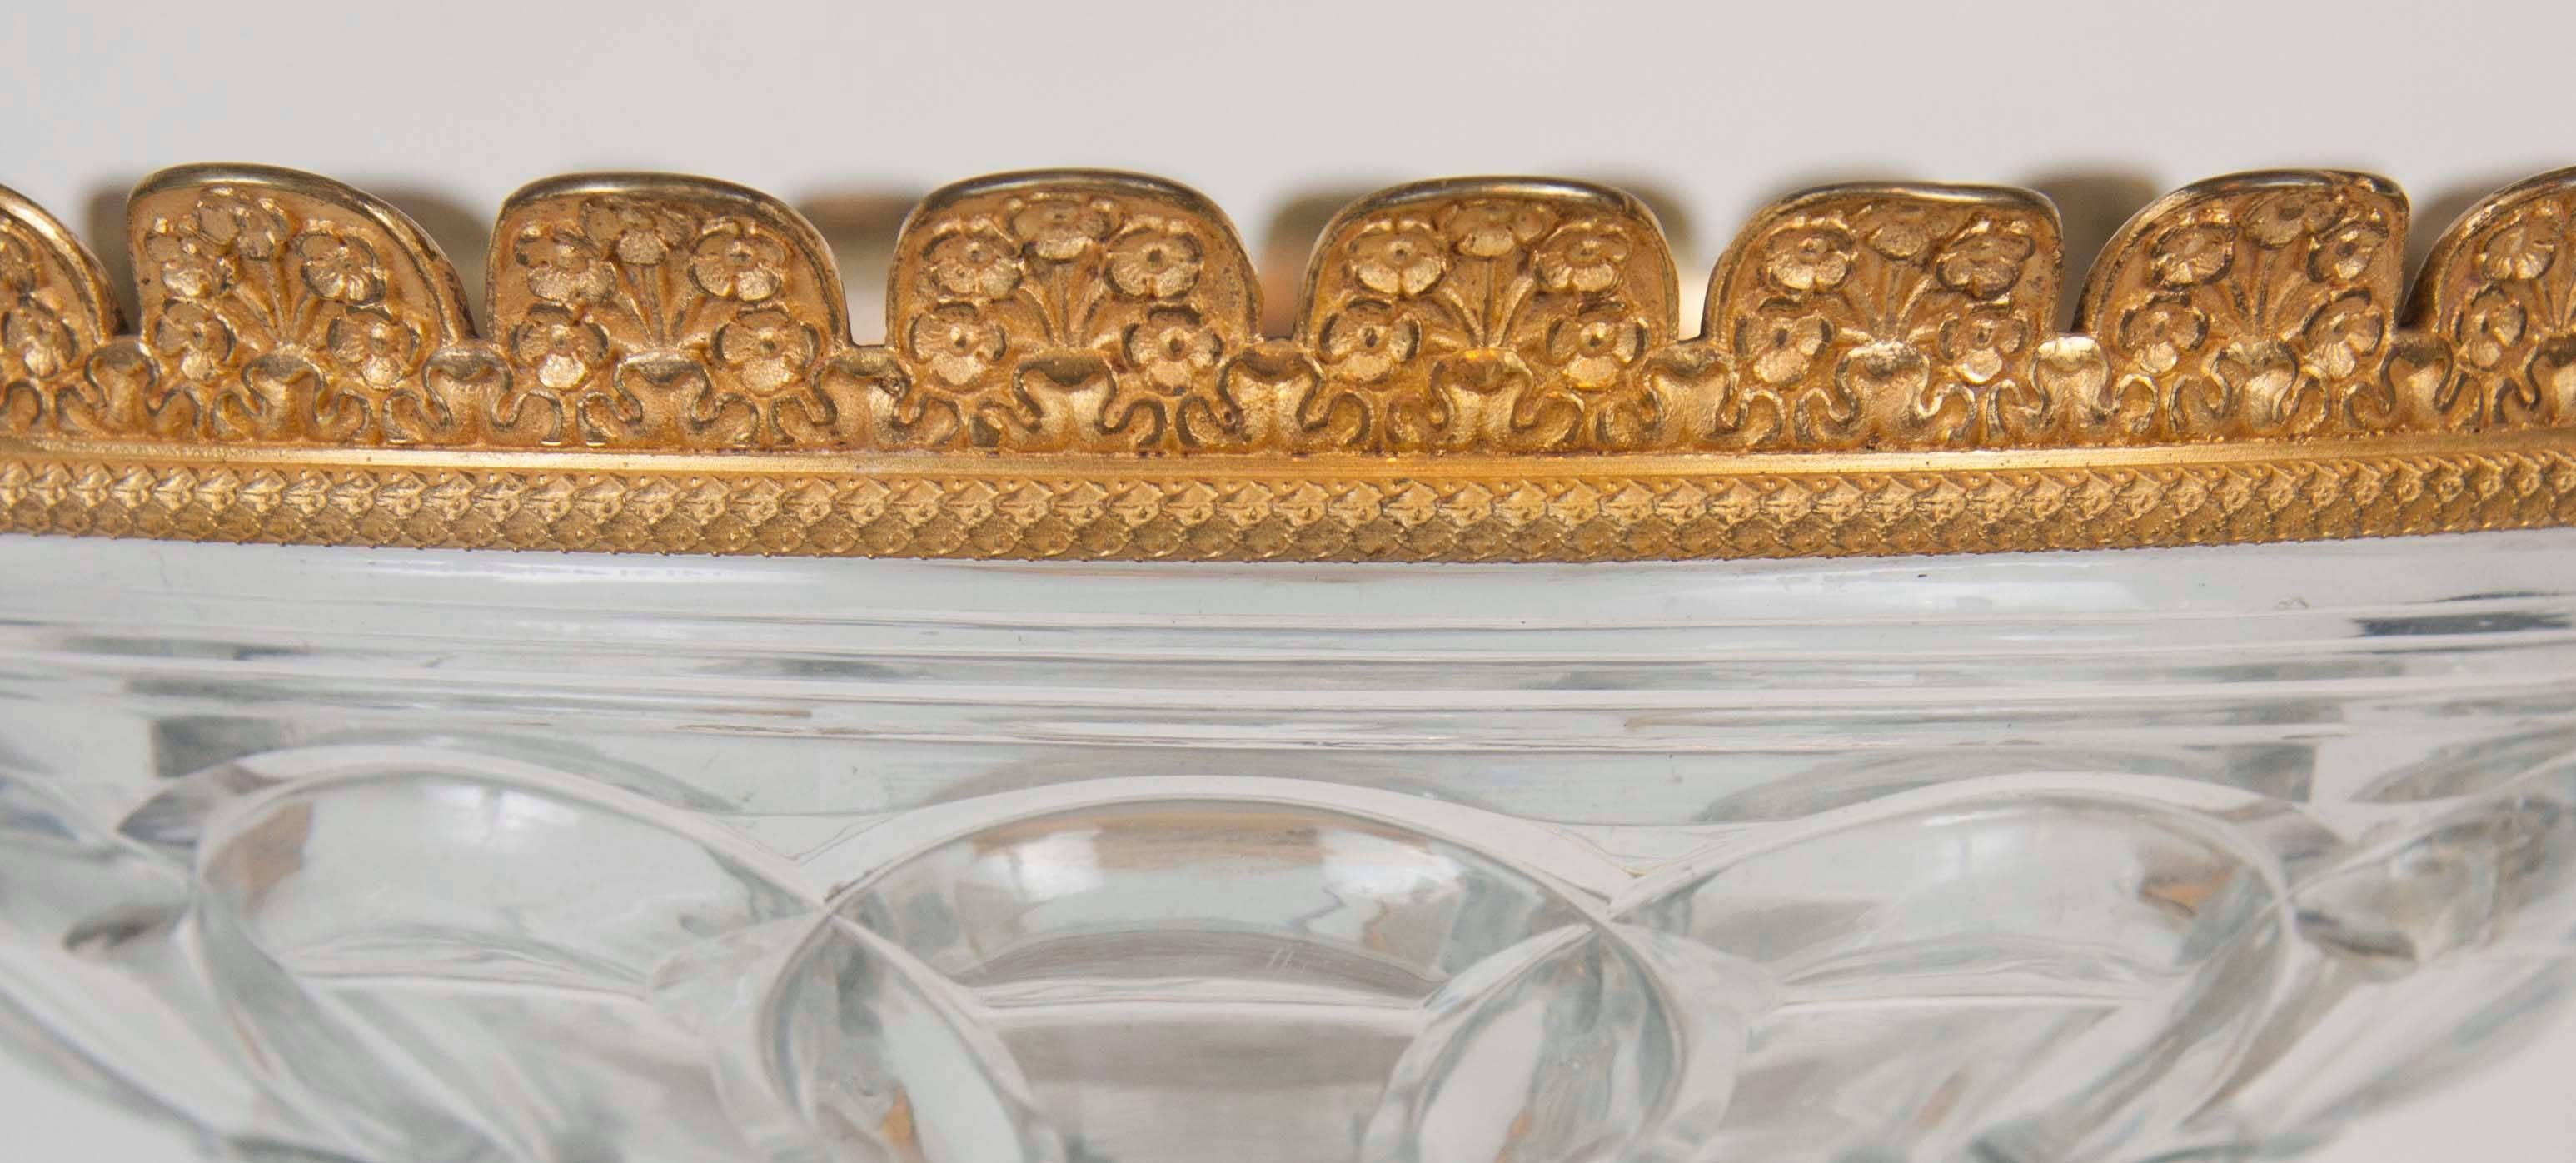 Early 19th Century Gilt Bronze Cut-Glass Centerpiece For Sale 1